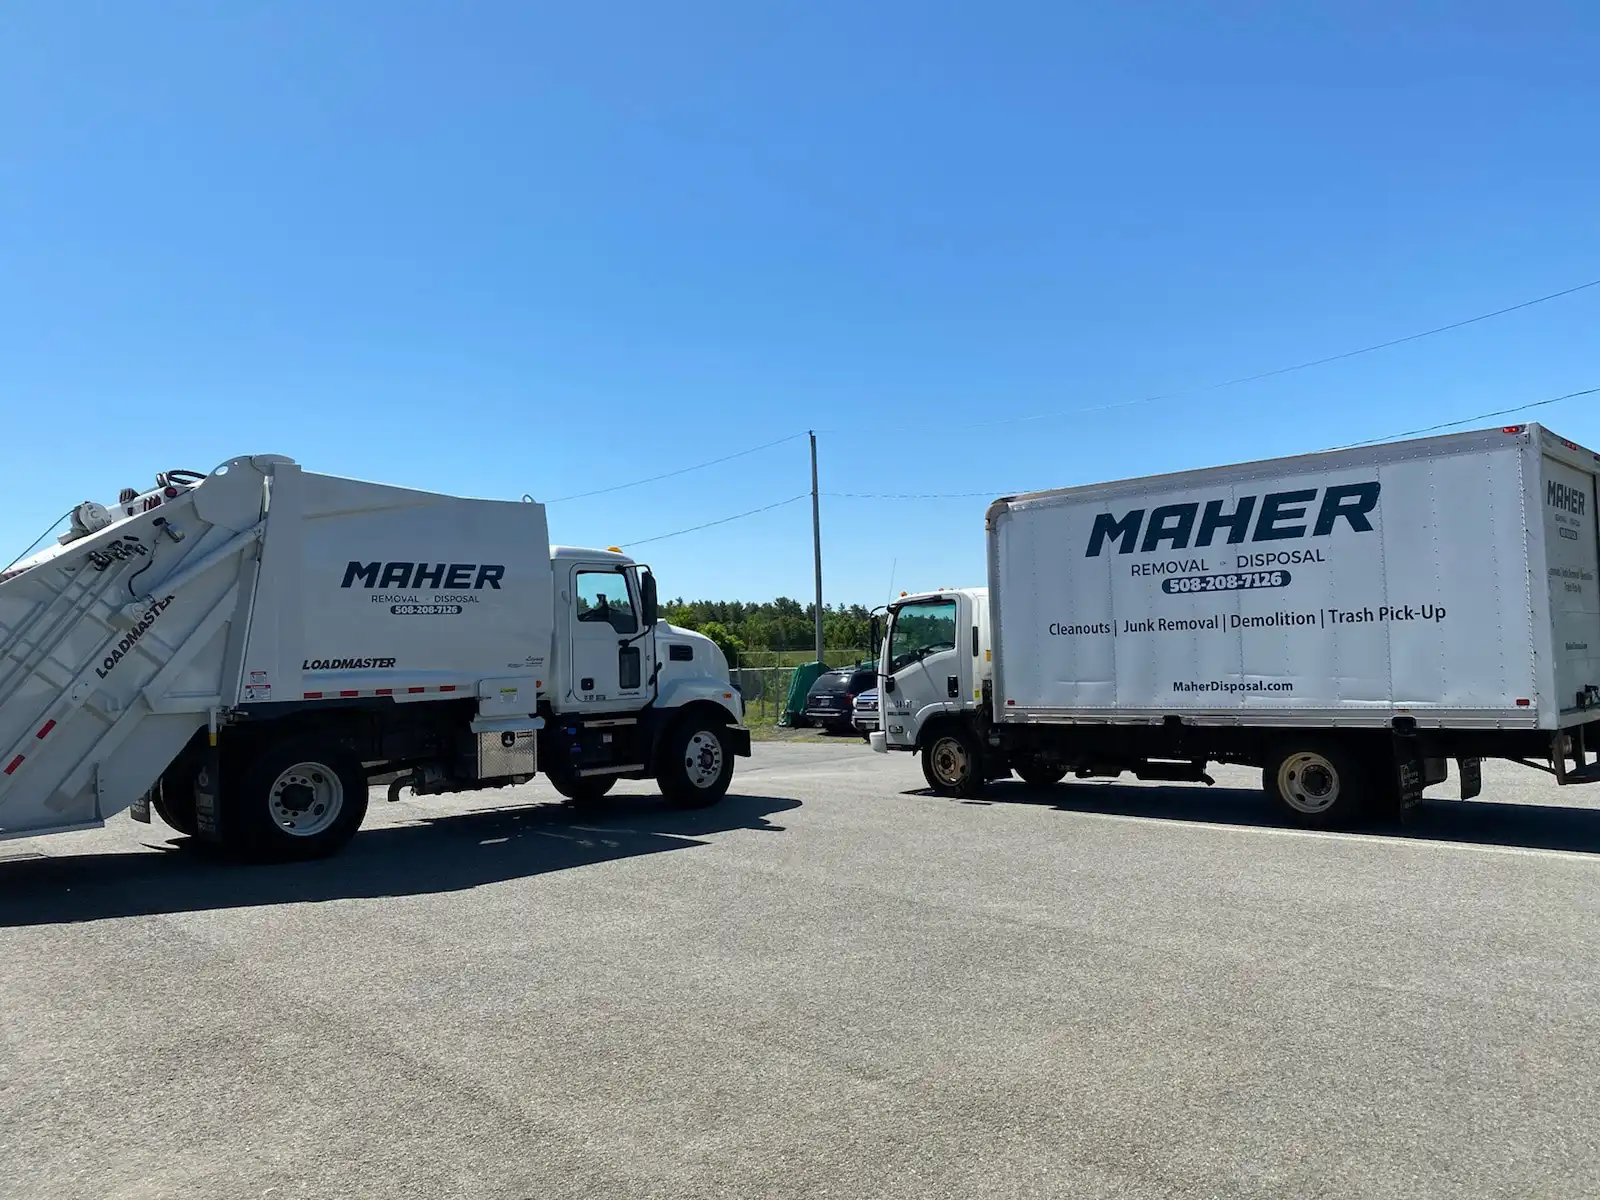 Maher Removal & Disposal is a Trash Pickup & Junk Removal company in Pembroke, MA